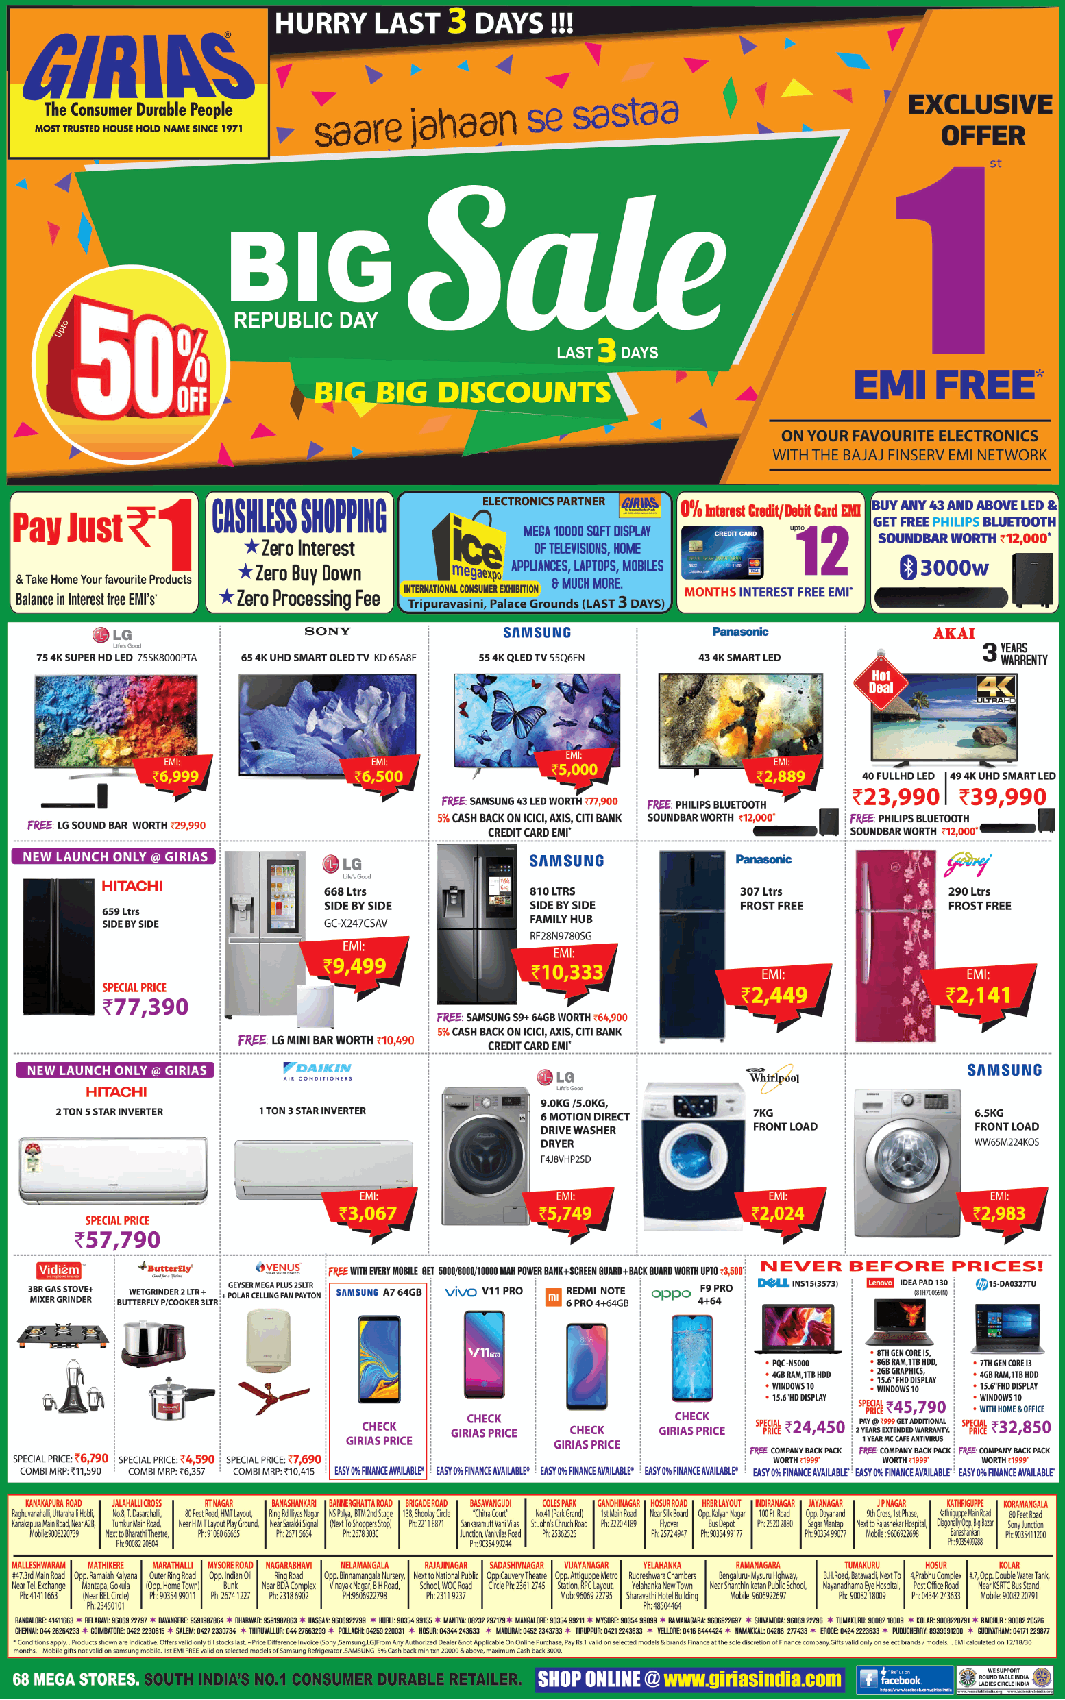 girias-big-republic-day-sale-exclusive-offer-1-emi-free-ad-bangalore-times-02-02-2019.png